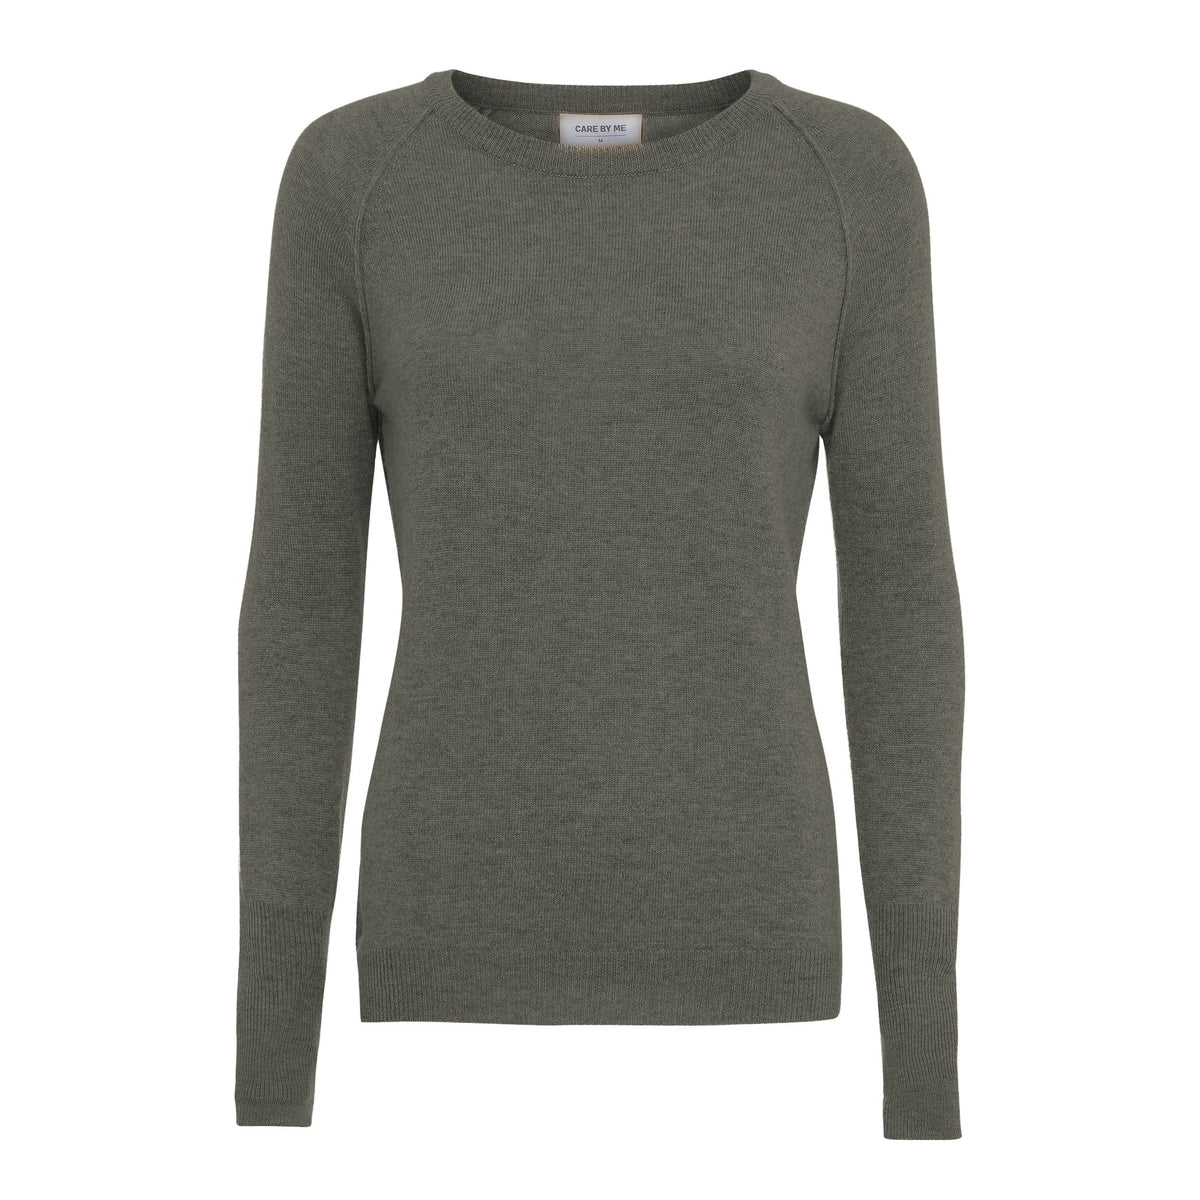 CARE BY ME Faith 100% Cashmere Womens Sweater